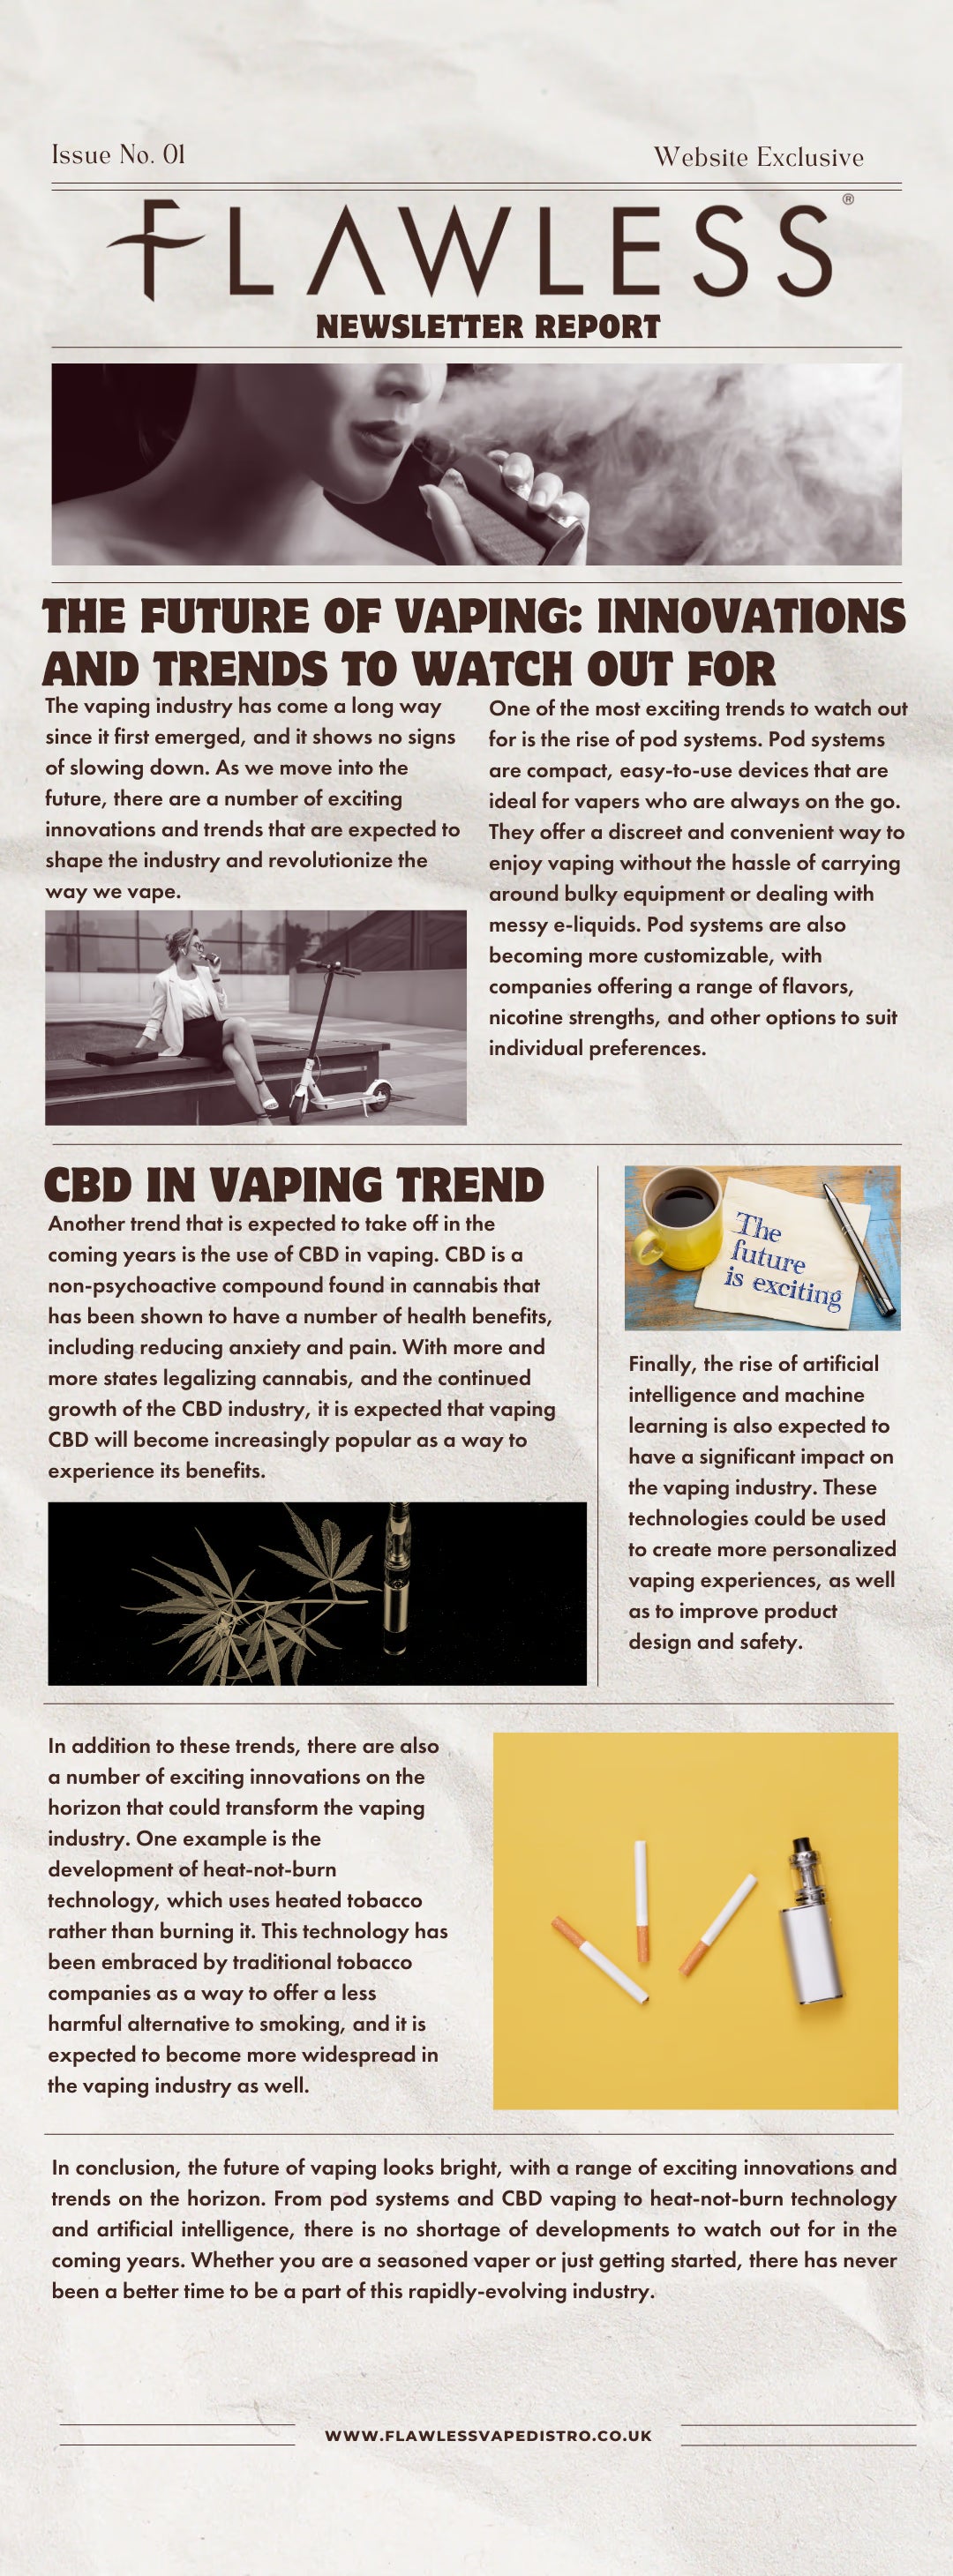 The Future of Vaping: Innovations and Trends to Watch Out For